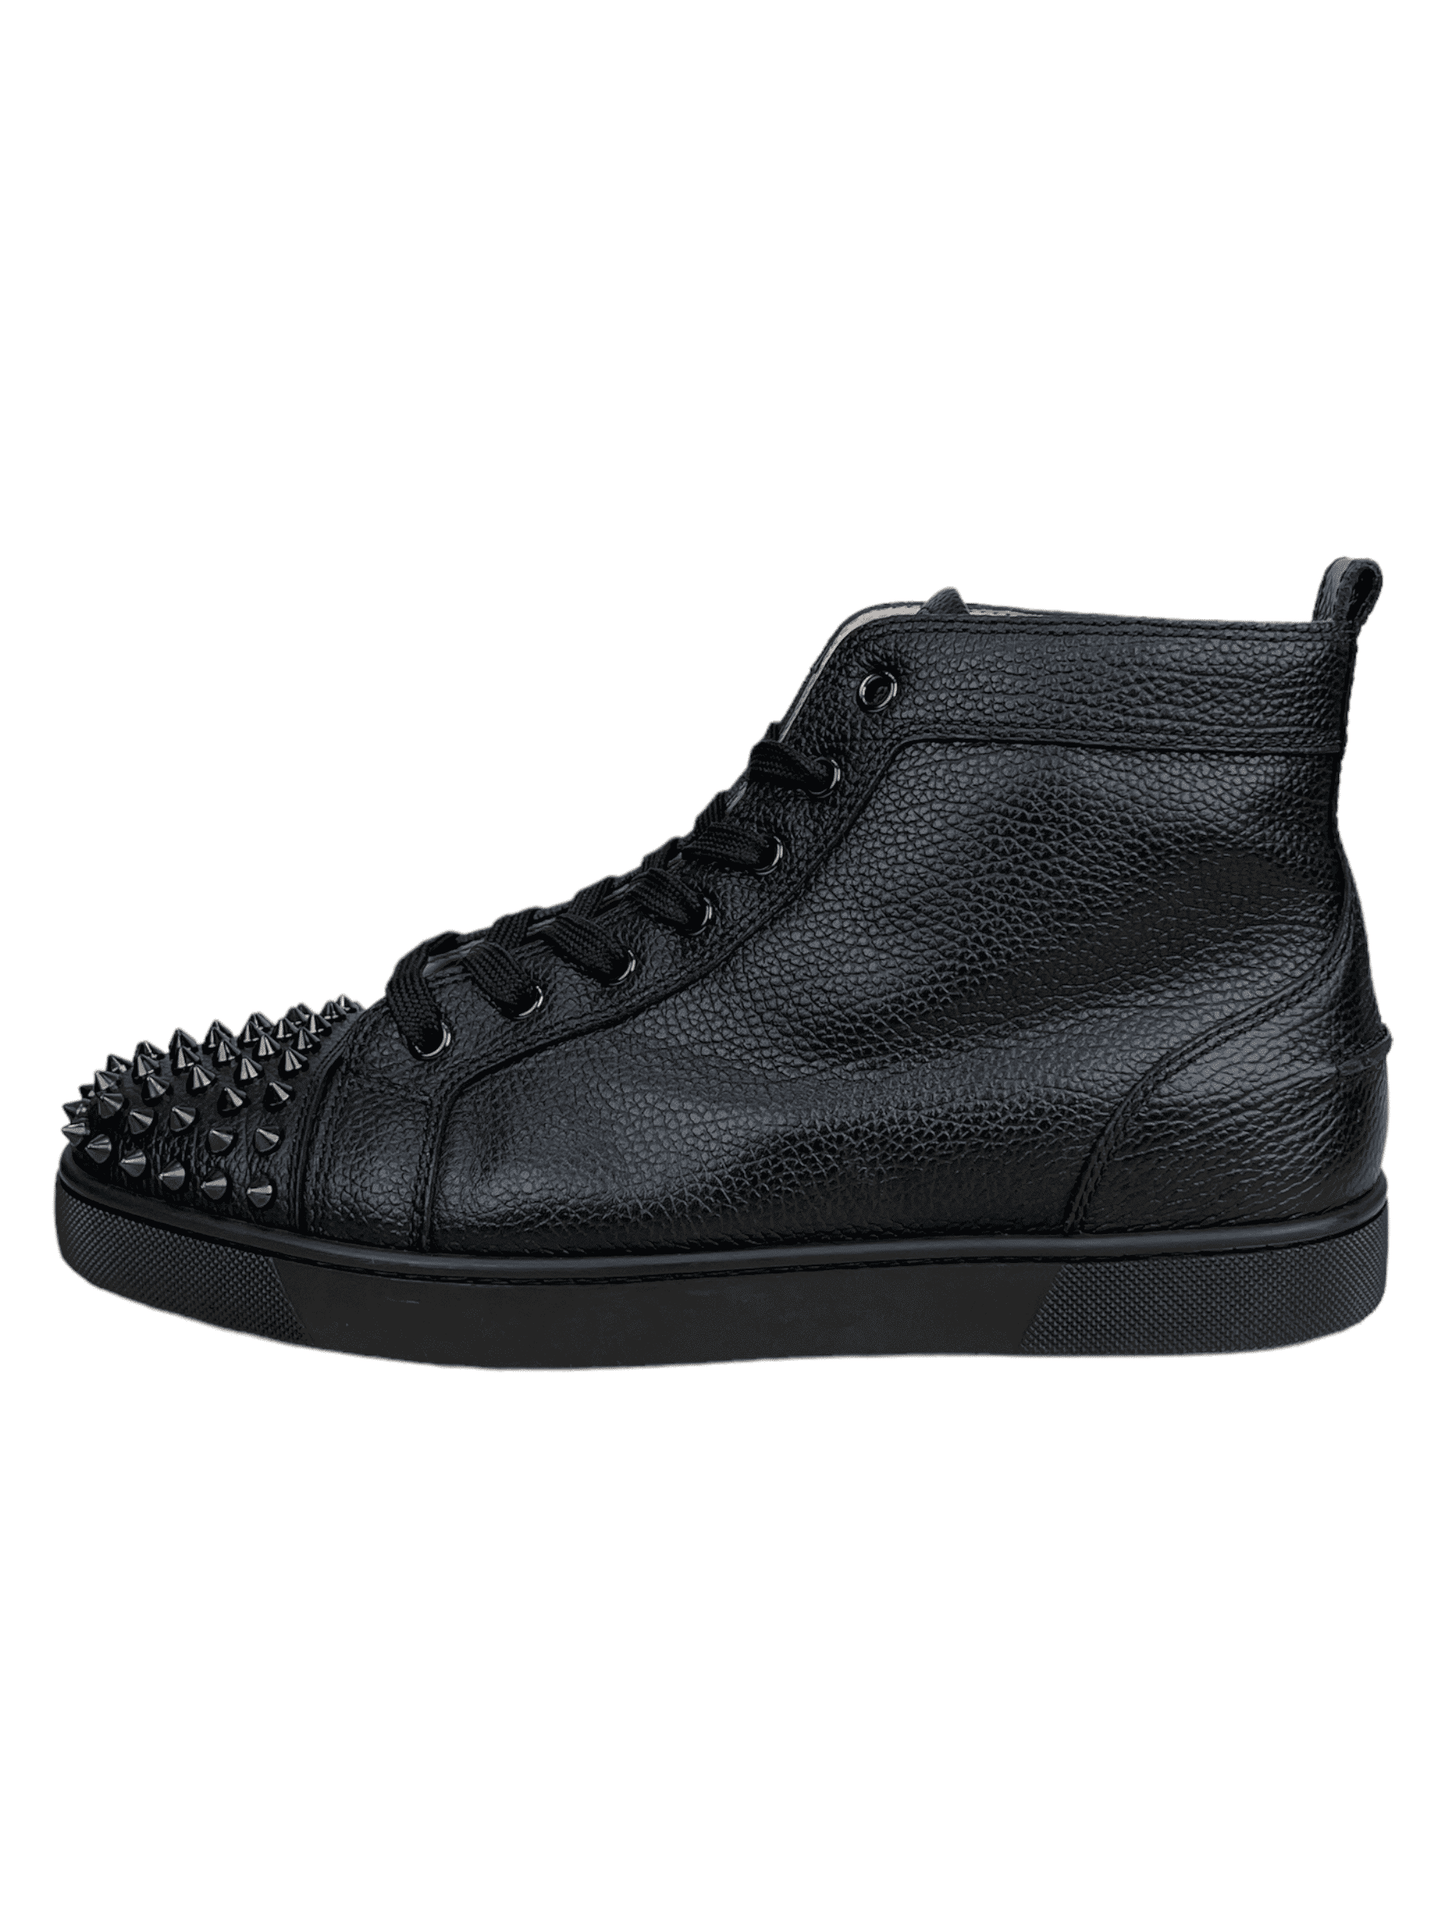 Christian Louboutin "The Lou spikes" Leather Hightop Sneakers - Genuine Design Luxury Consignment Calgary, Alberta, Canada New and Pre-Owned Clothing, Shoes, Accessories.